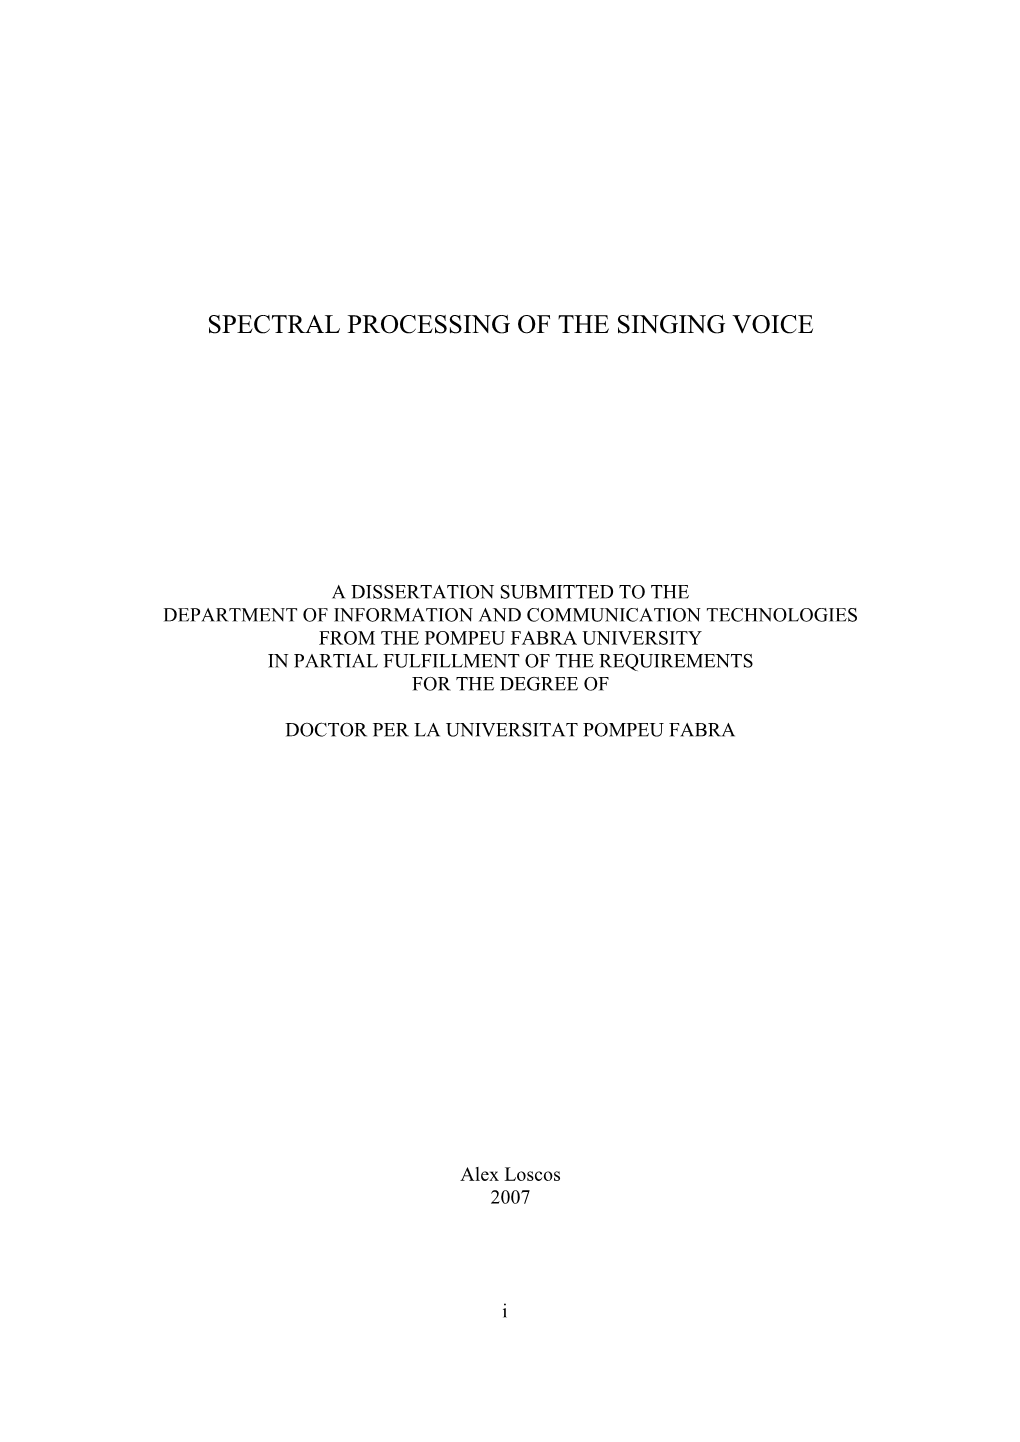 Spectral Processing of the Singing Voice